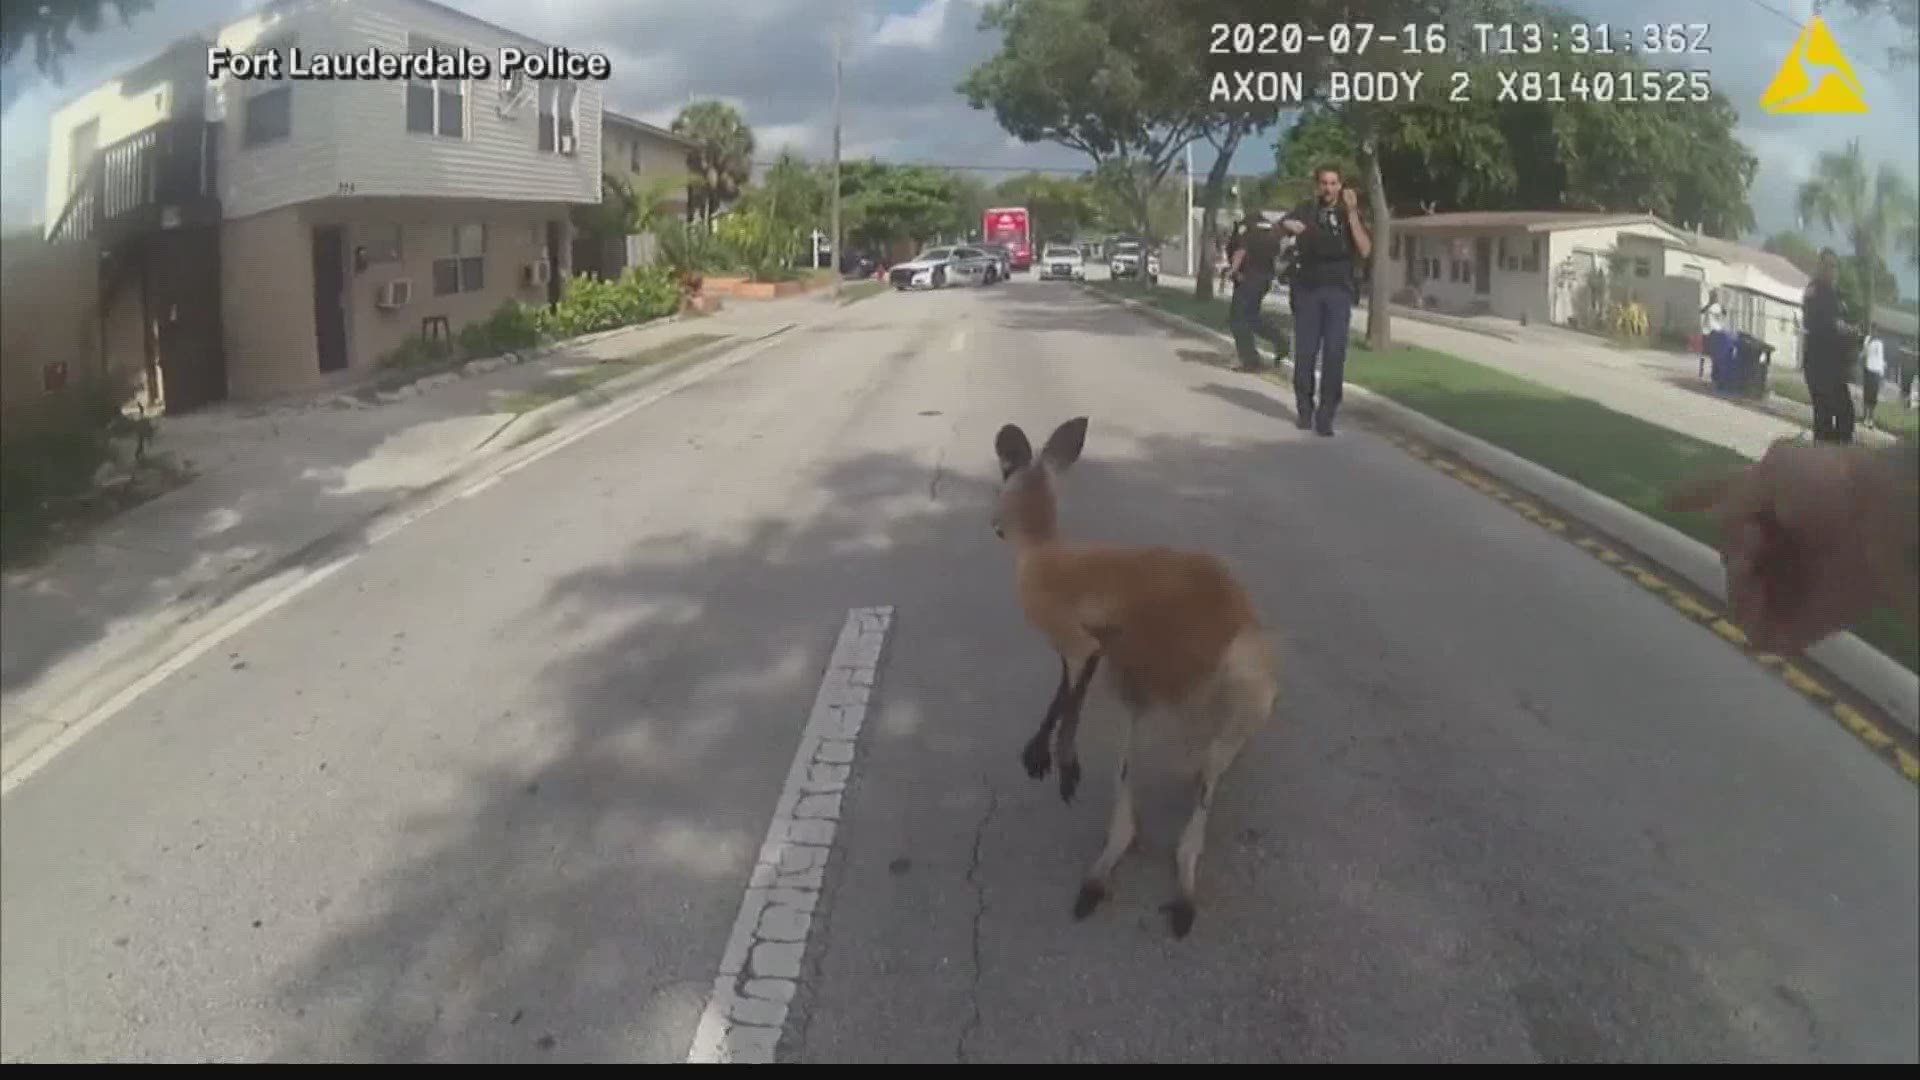 Ft. Lauderdale police were able to capture a kangaroo that got loose on a neighborhood street.